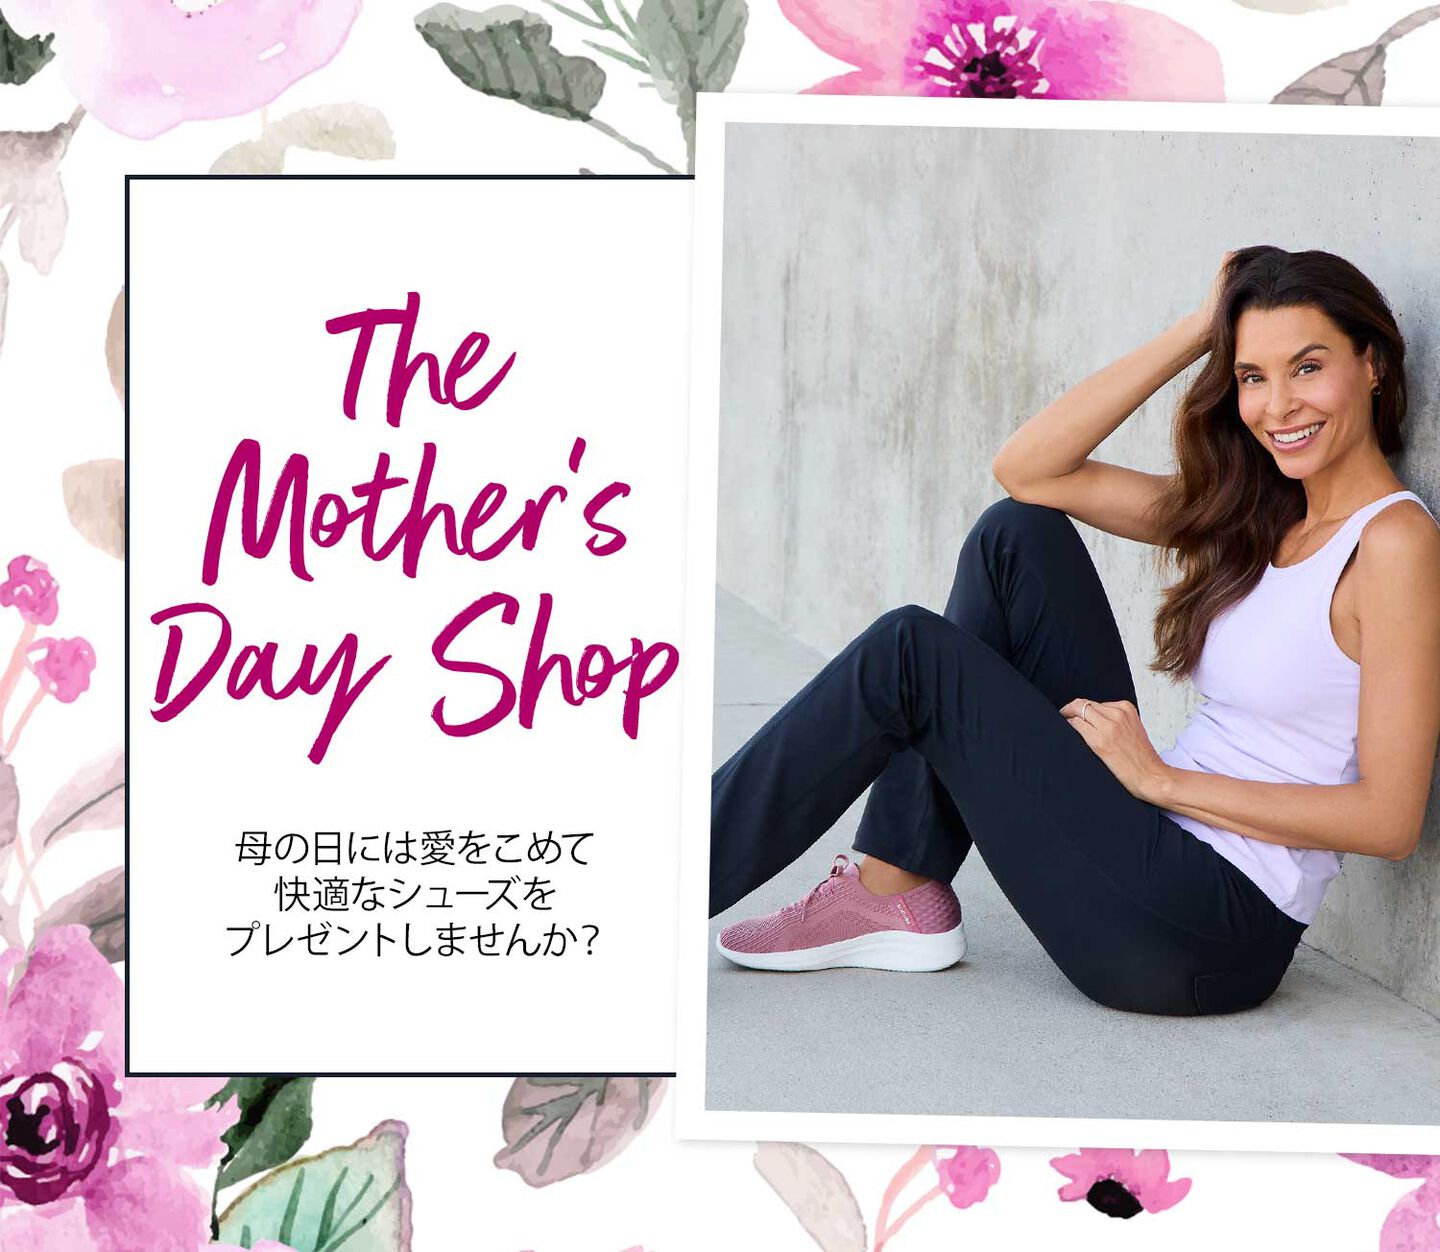 THE MOTHER'S DAY SHOP